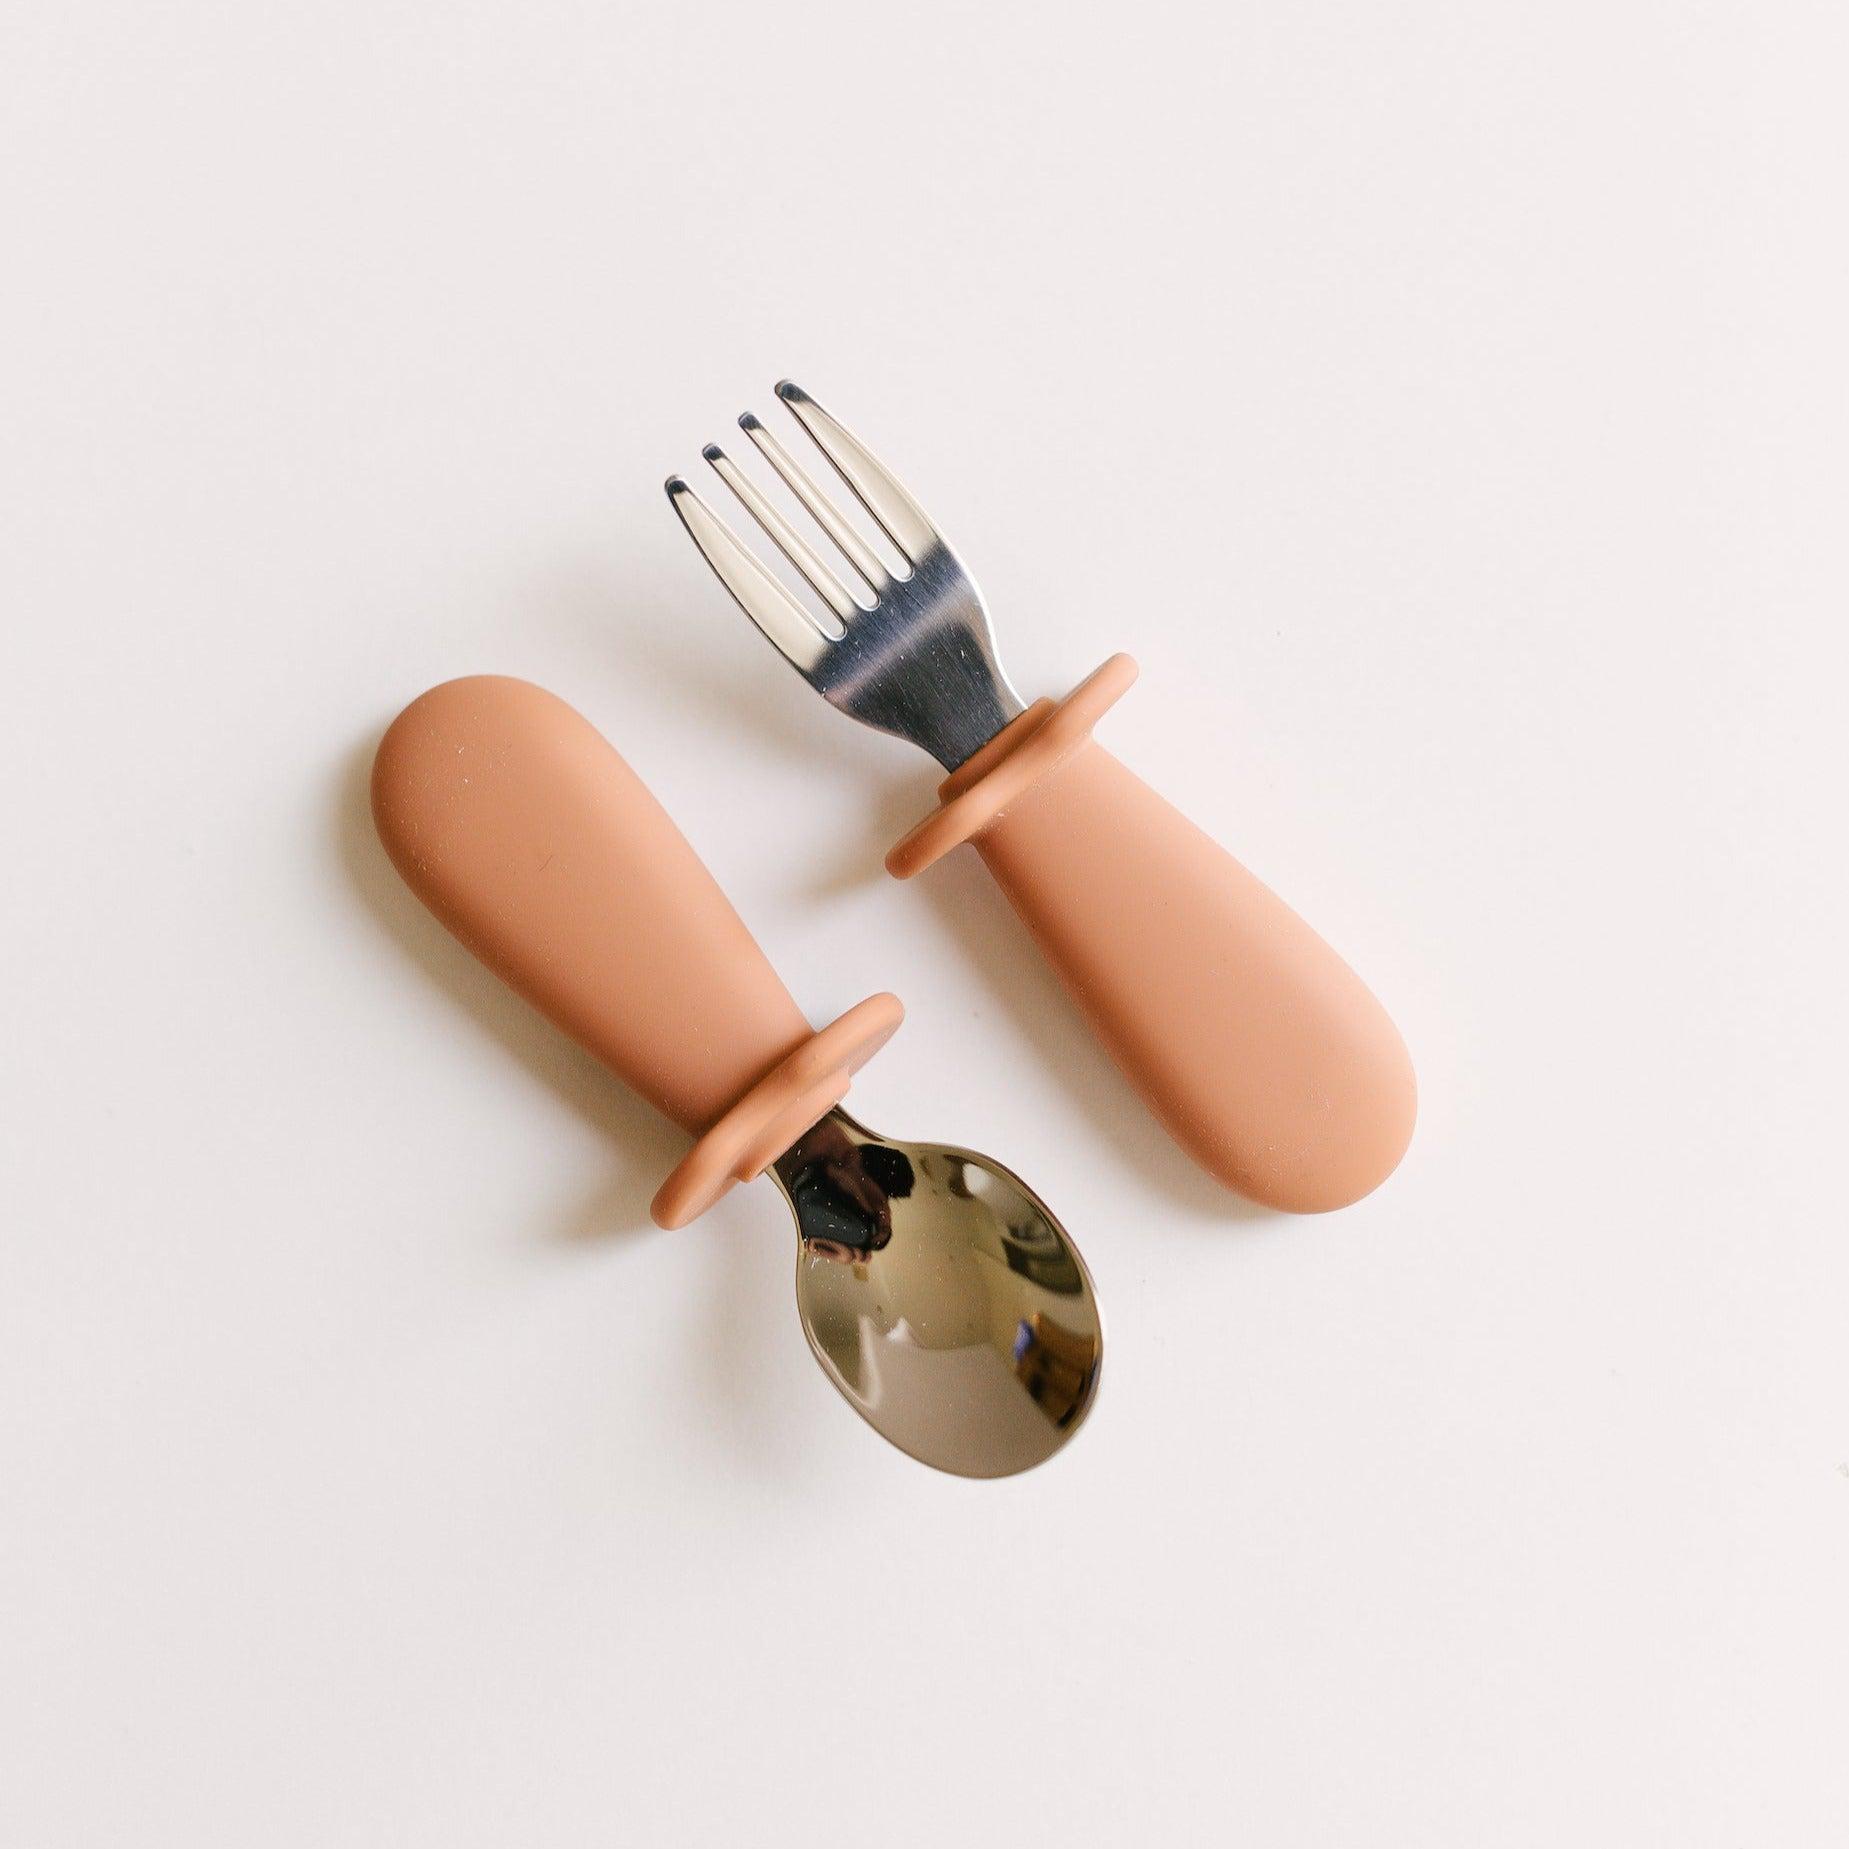 A Rommer toddler cutlery set in cinnamon, designed to encourage independence during mealtime, perfect for curious little hands.